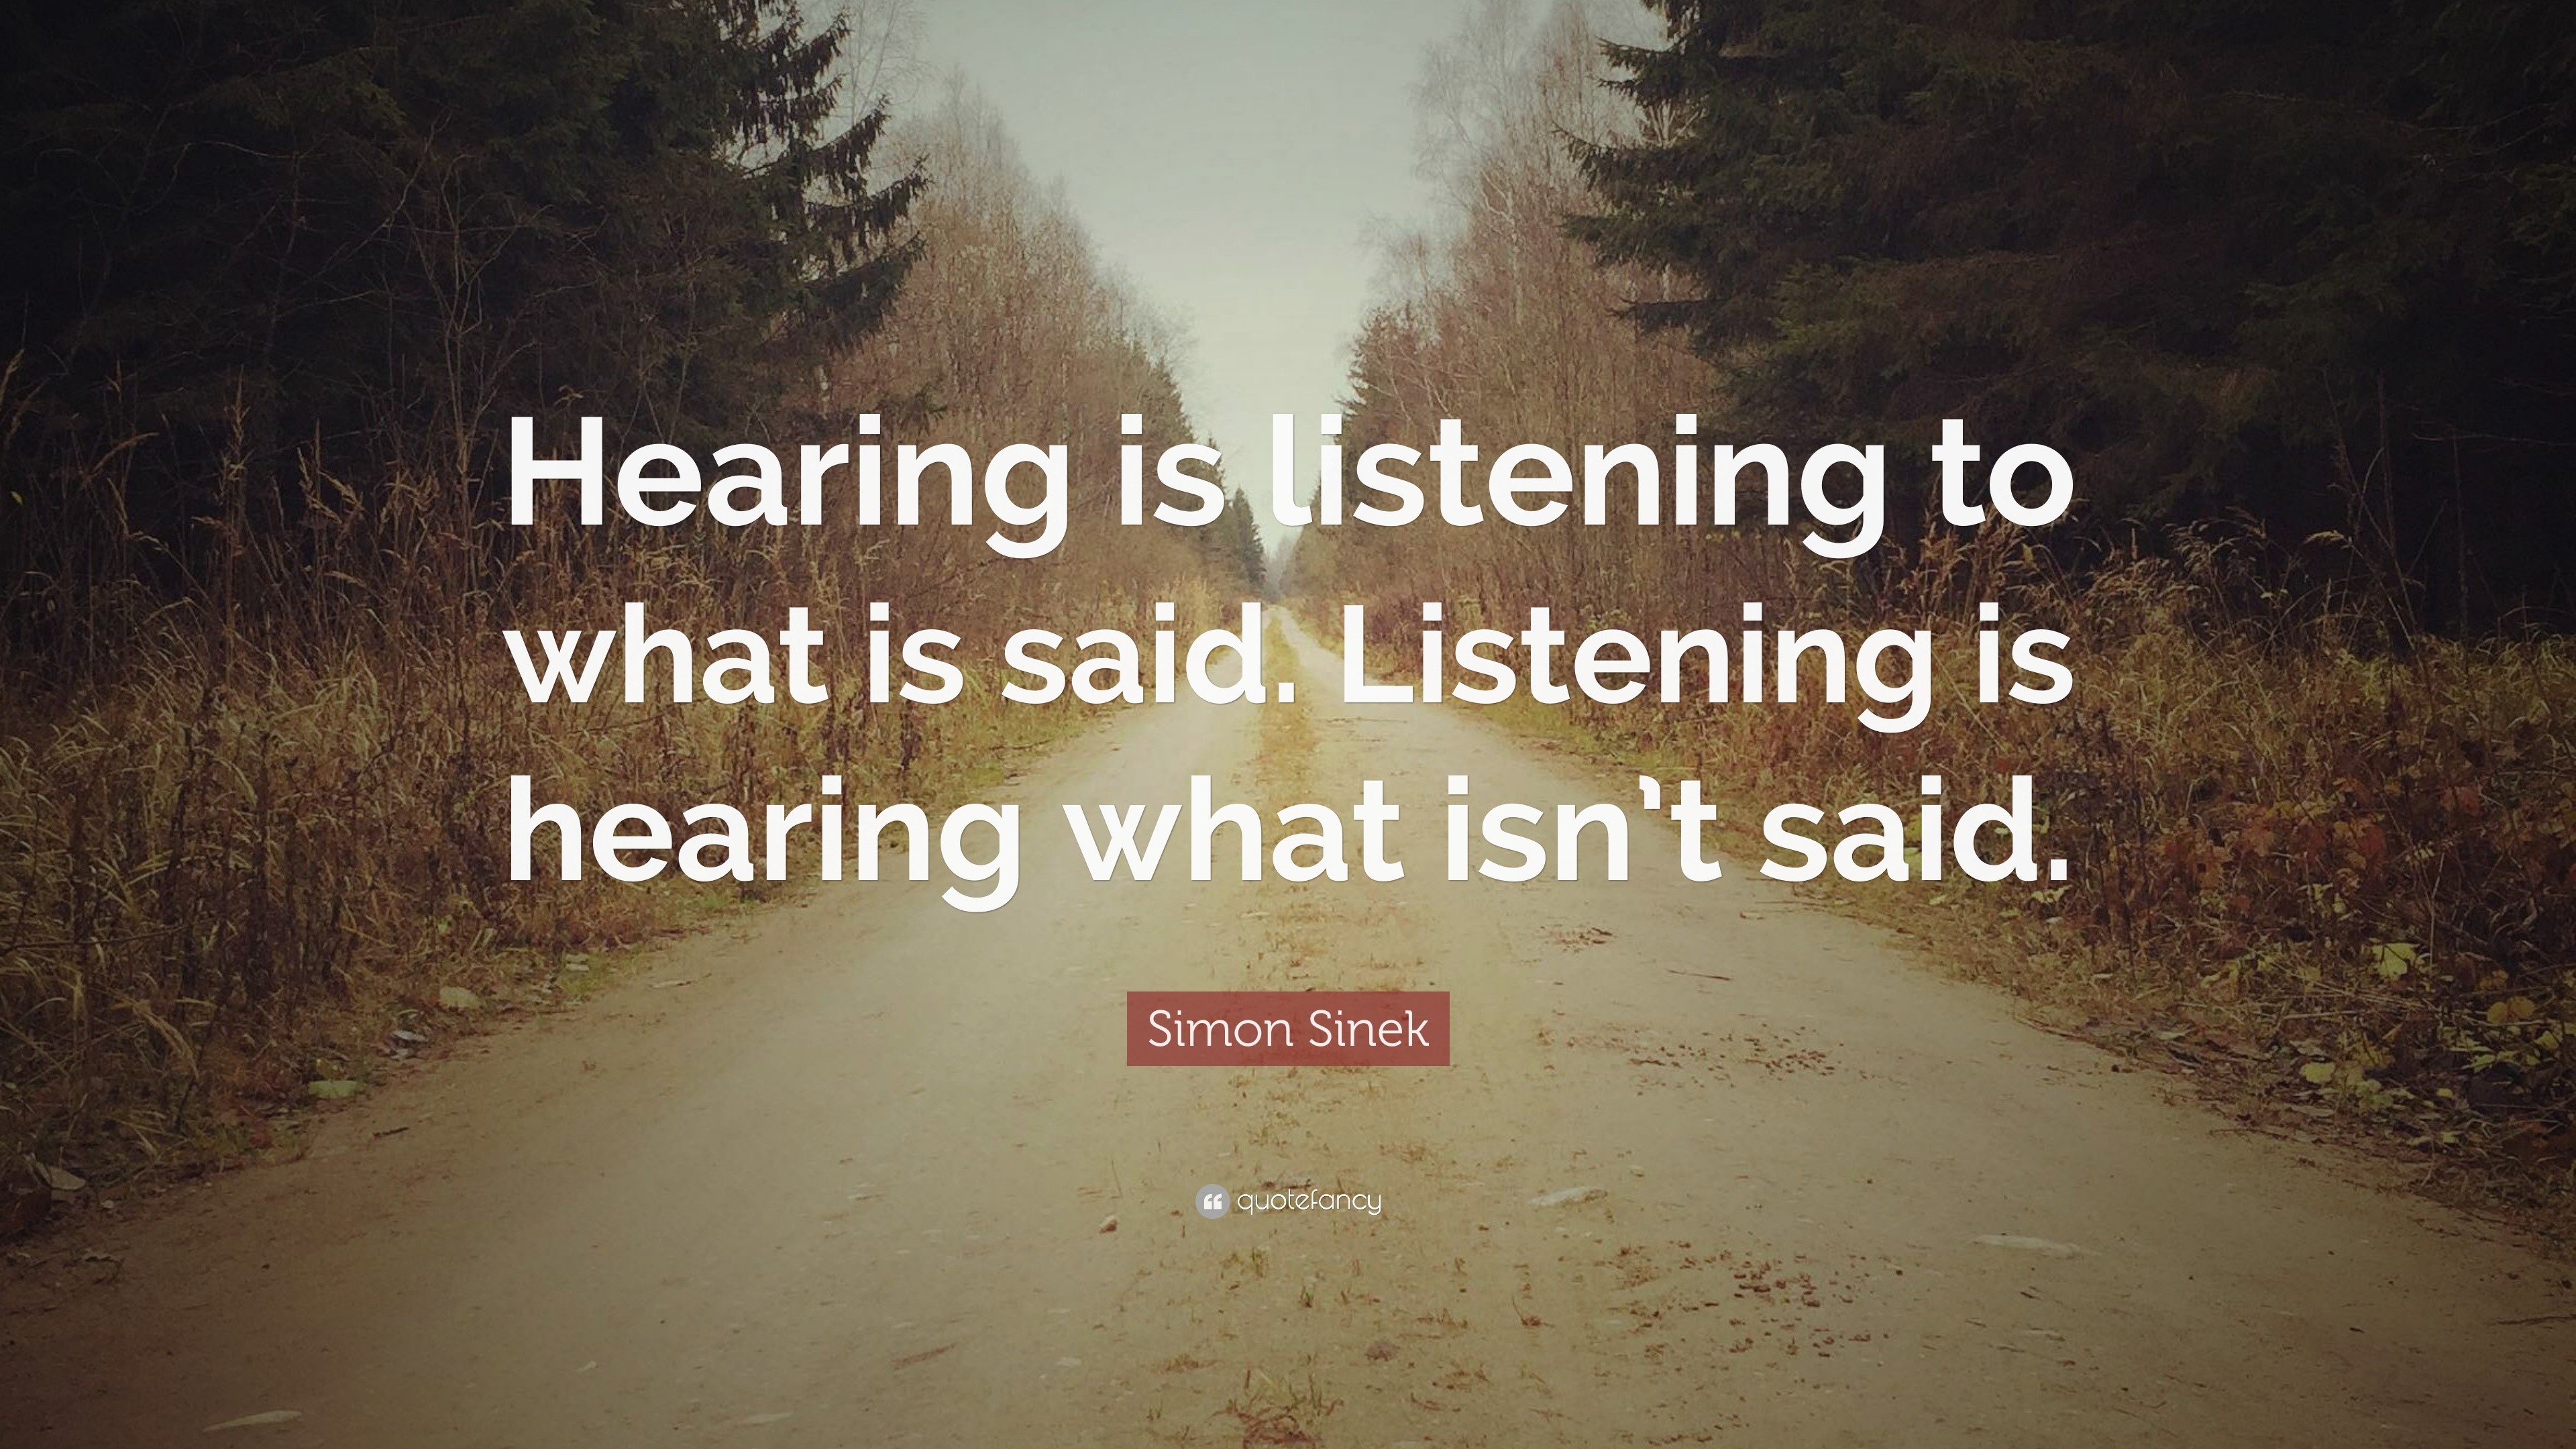 Simon Sinek Quote: “Hearing is listening to what is said. Listening is  hearing what isn't said.” (7 wallpapers) - Quotefancy